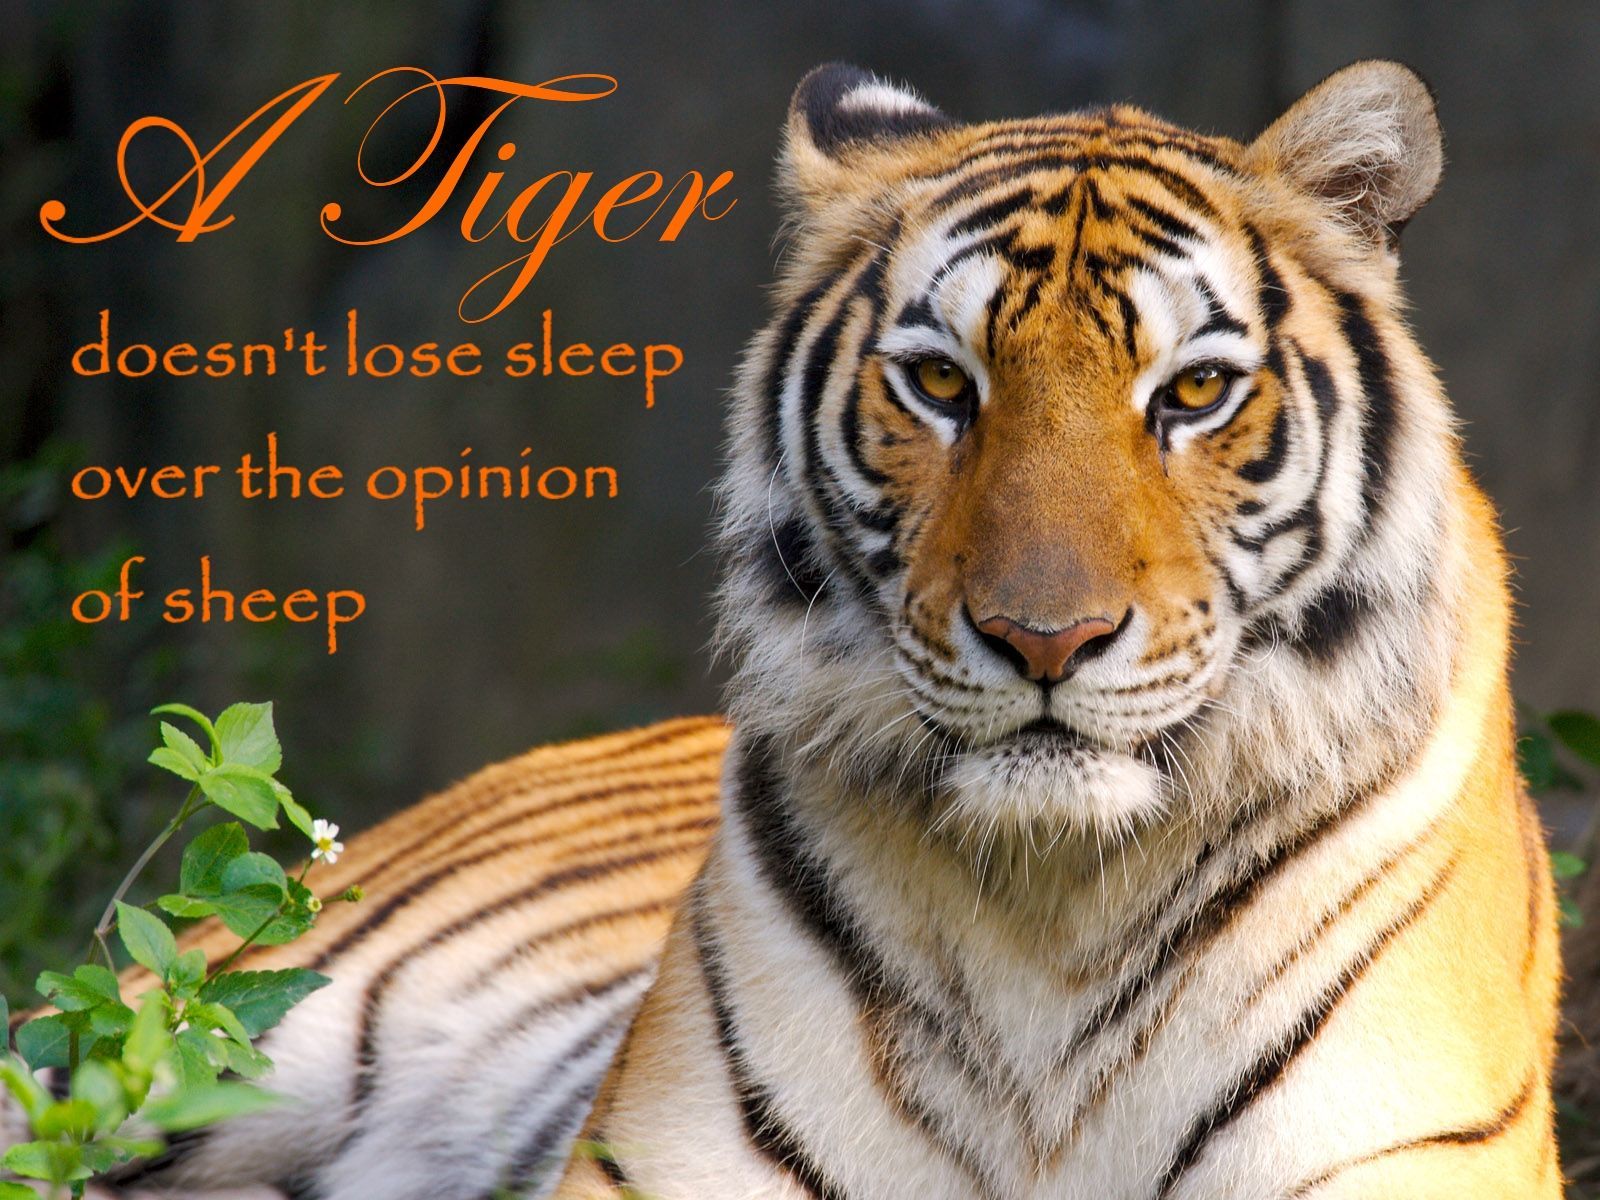 A tiger doesn't lose sleep over the opinion of sheep. What if you